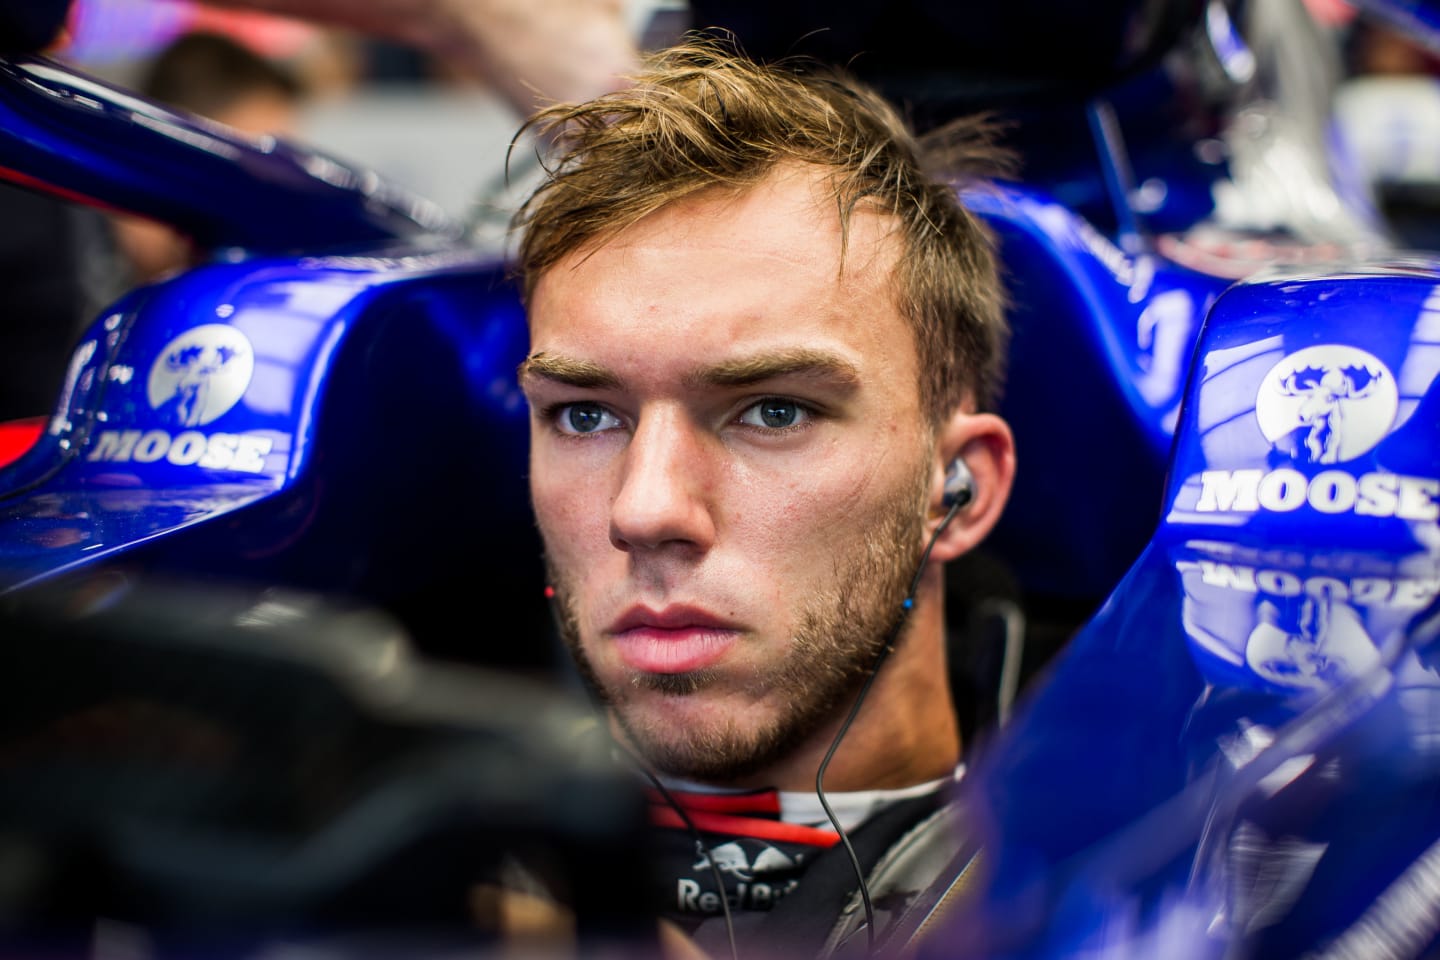 SINGAPORE, SINGAPORE - SEPTEMBER 20: Pierre Gasly of Scuderia Toro Rosso and France during practice